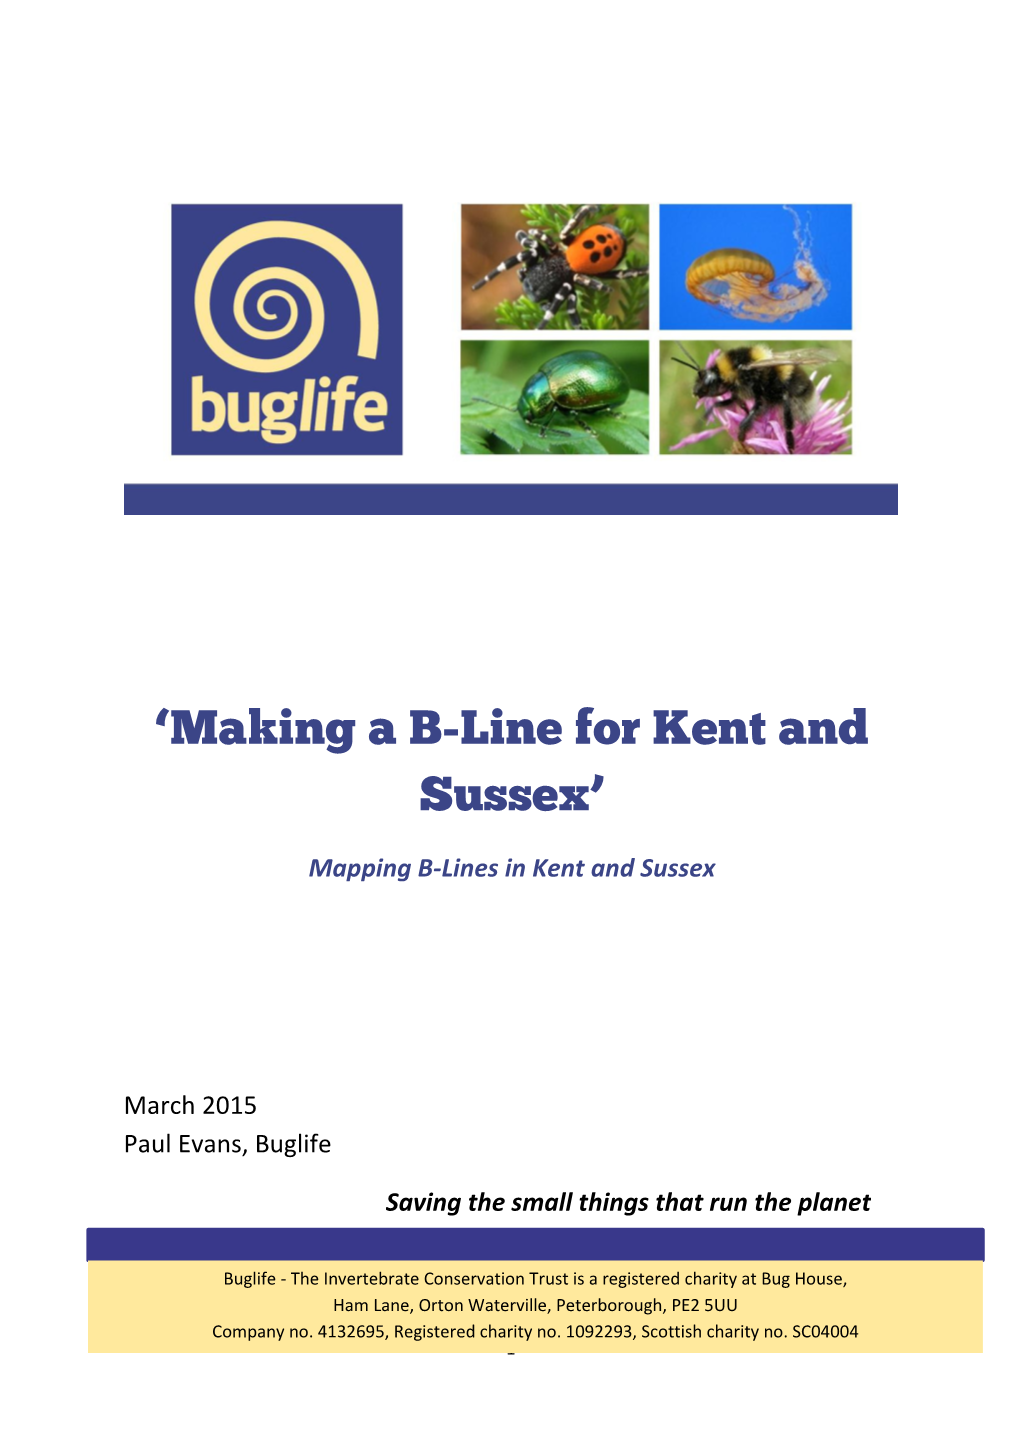 'Making a B-Line for Kent and Sussex'